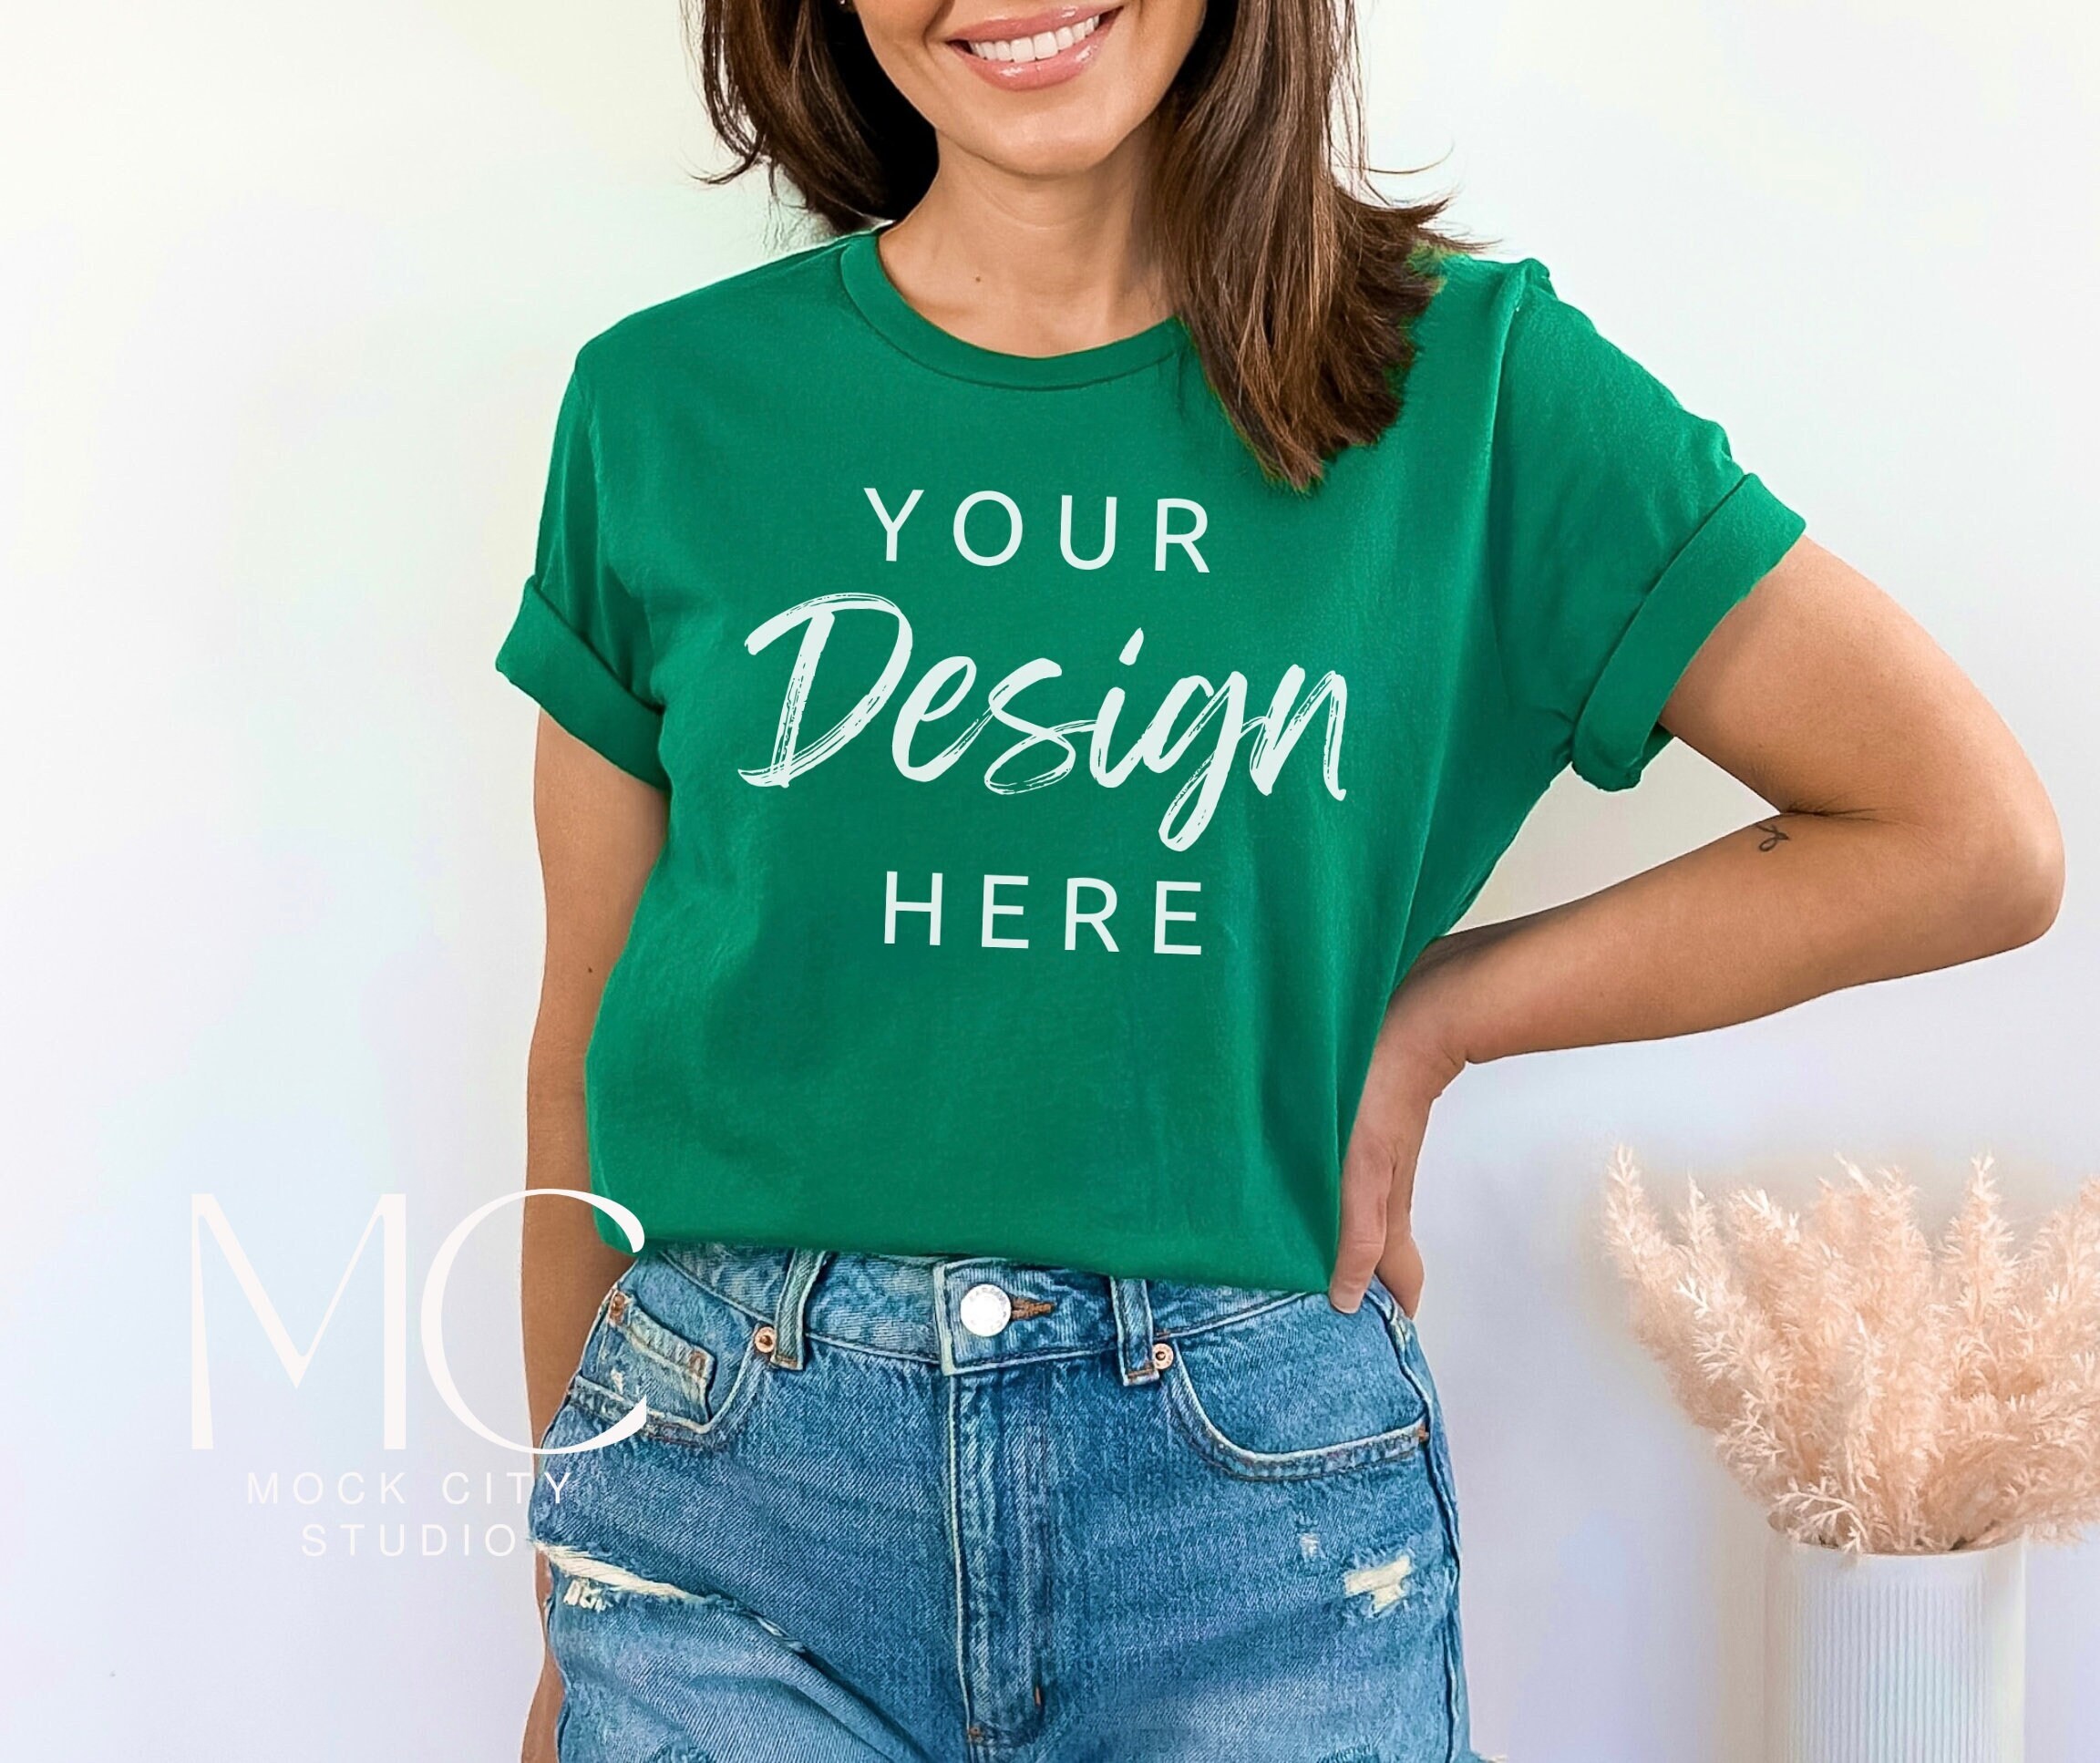 Kelly green tshirt Vectors & Illustrations for Free Download